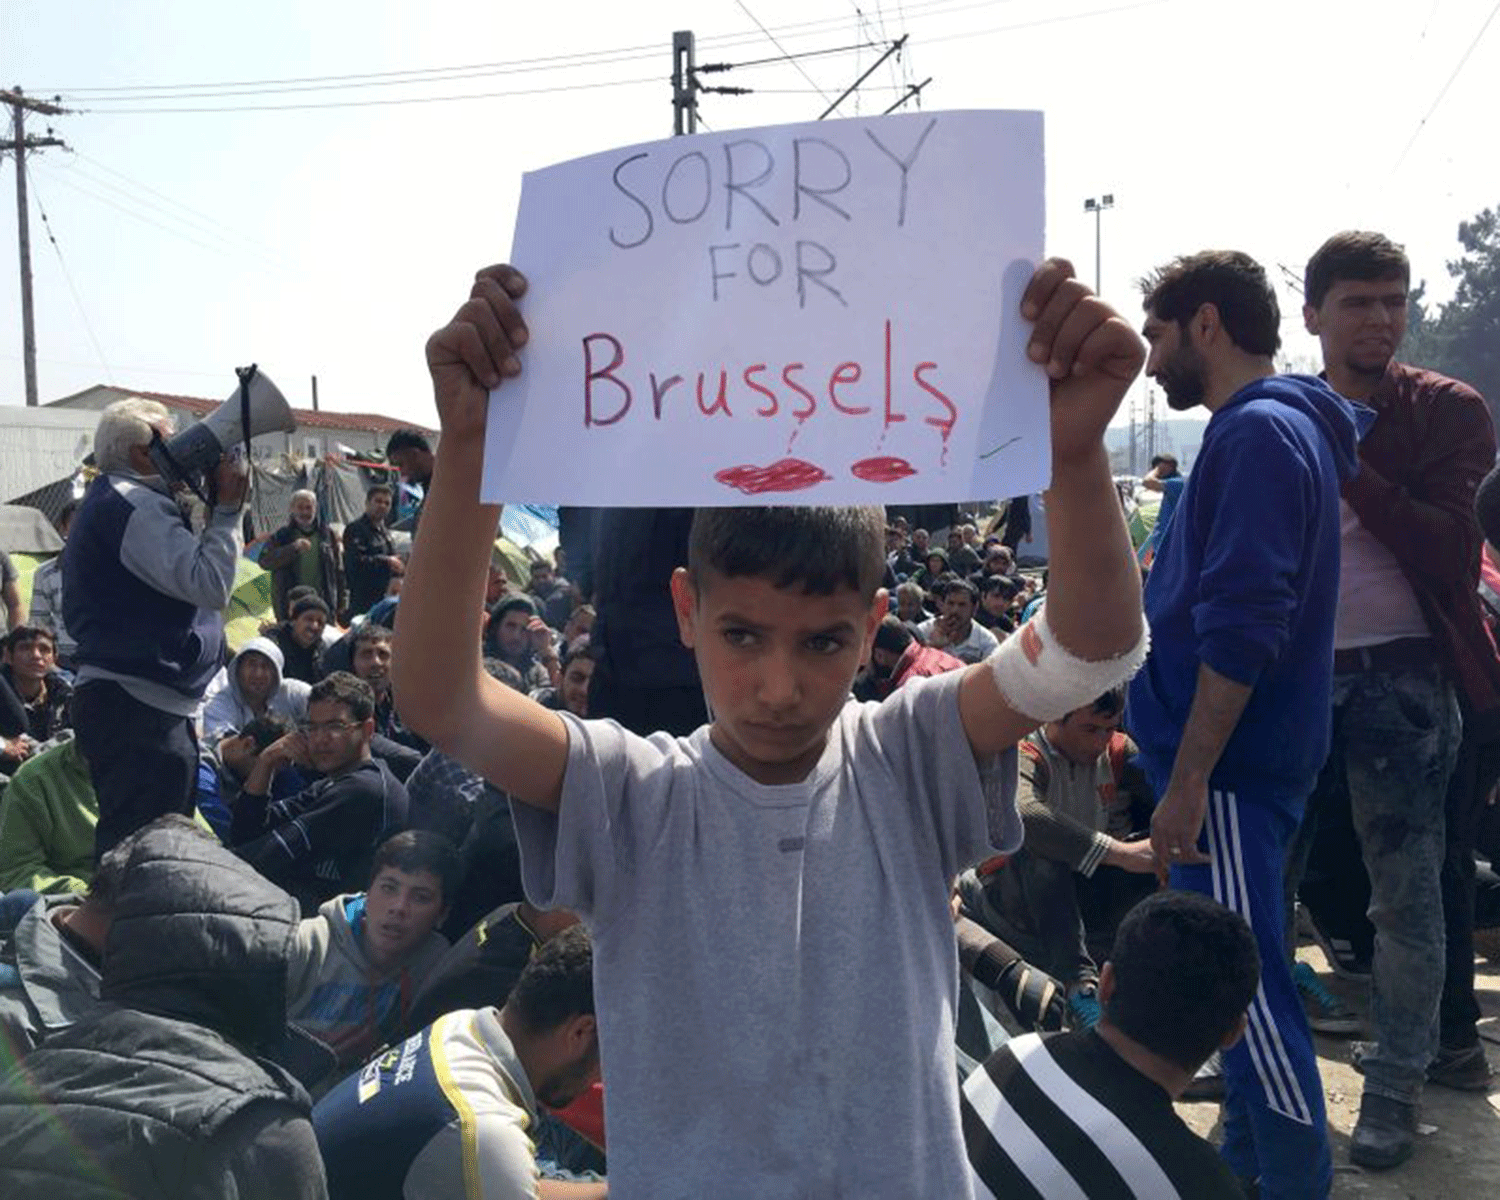 A boy holds a sign expressing sorrow for Brussels' deaths at the notorious Idomeni camp in Greece